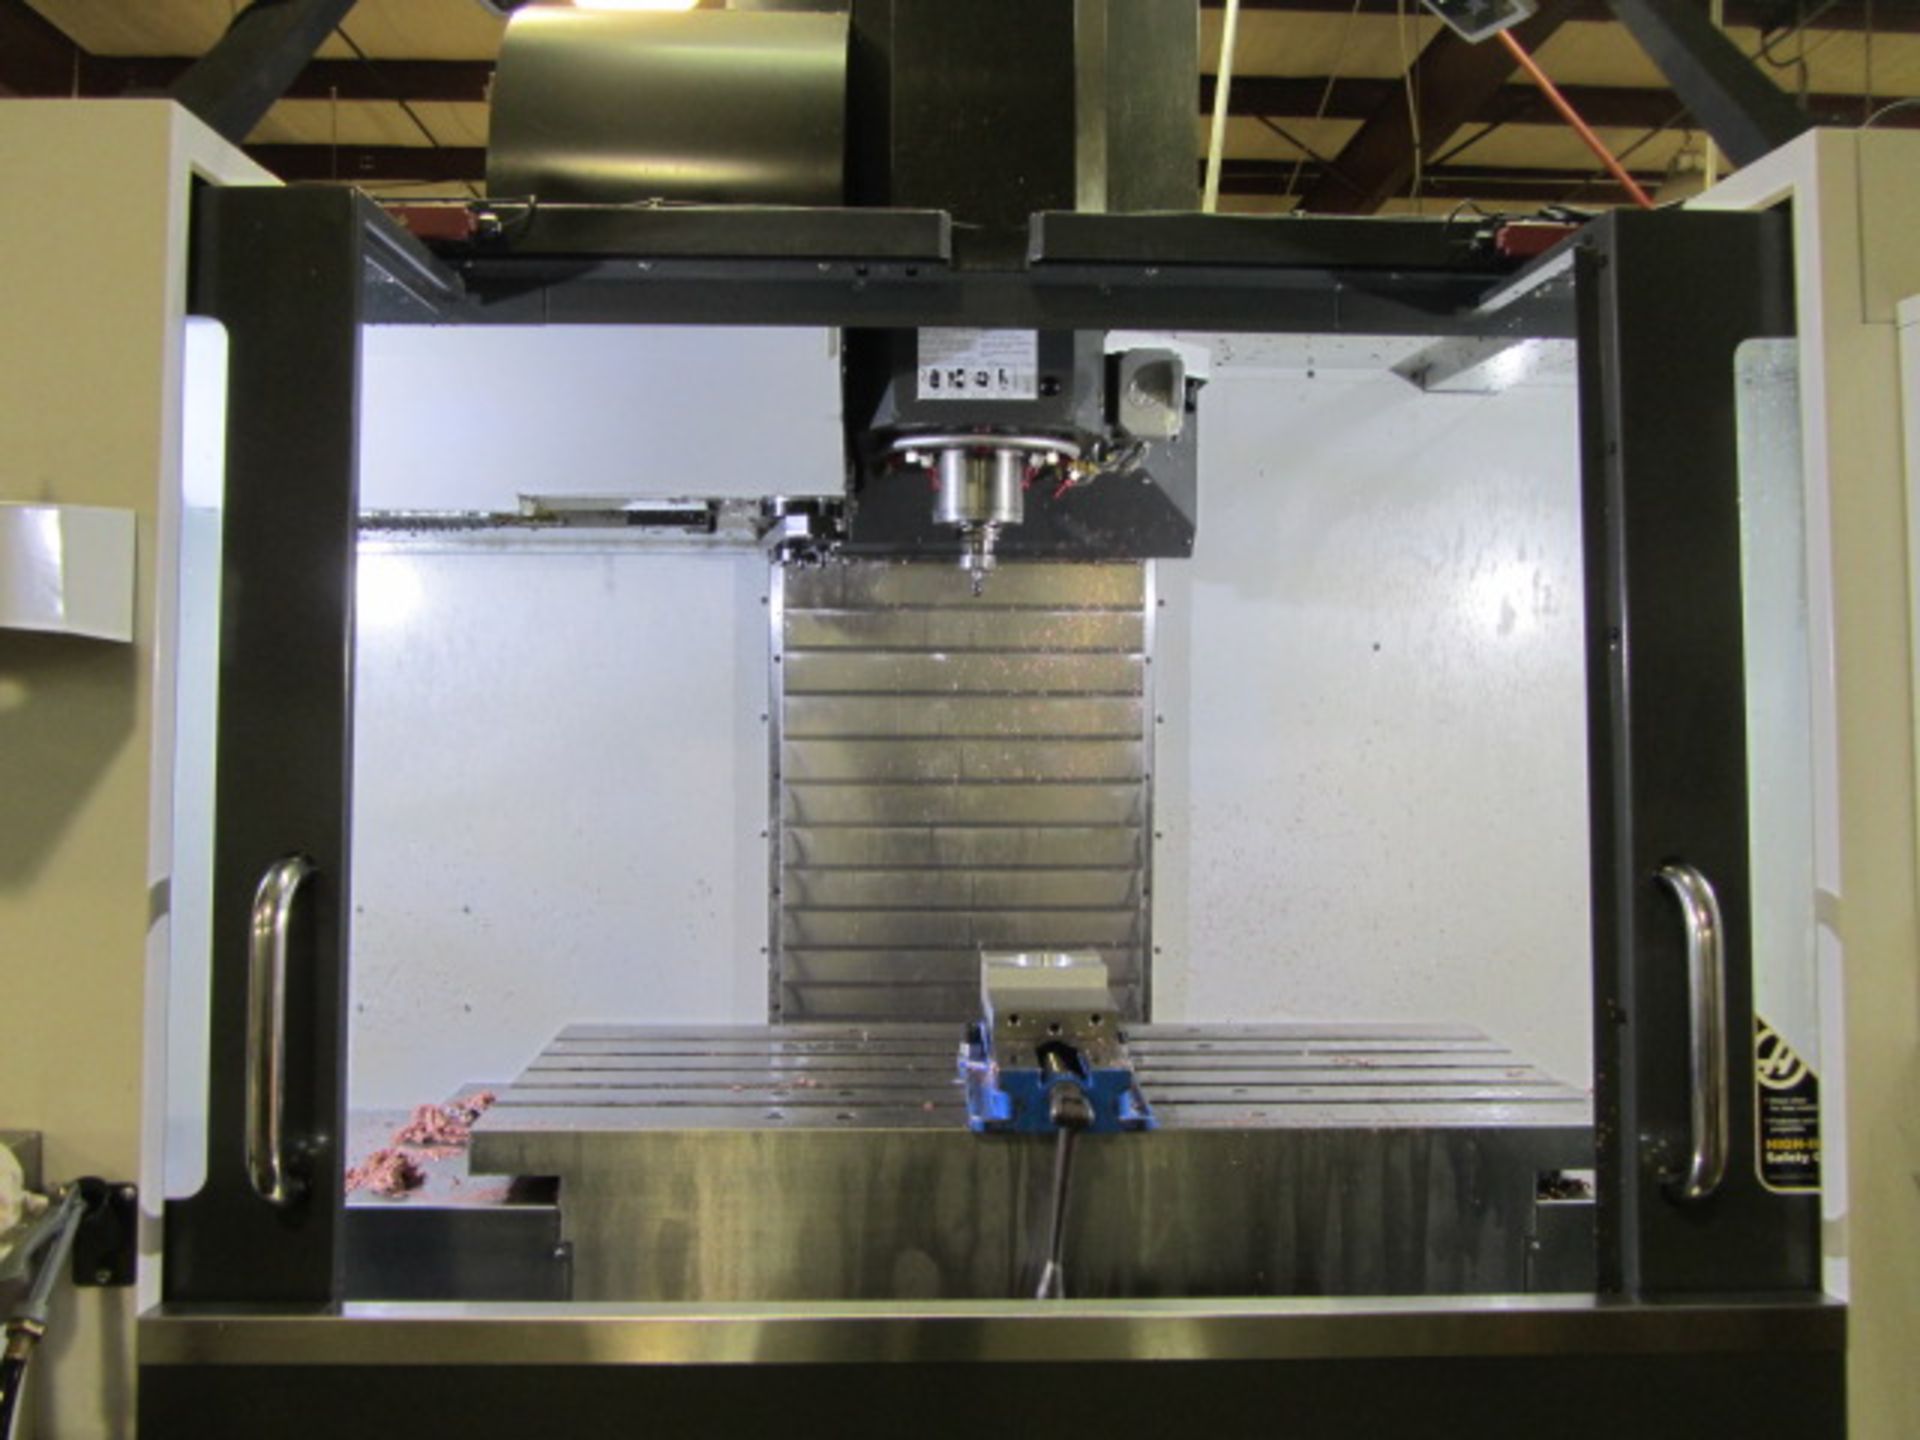 Haas VF-4 CNC Vertical Machining Center with 52'' x 20'' Table, #40 Taper Spindle Speeds to 8100 - Image 6 of 8